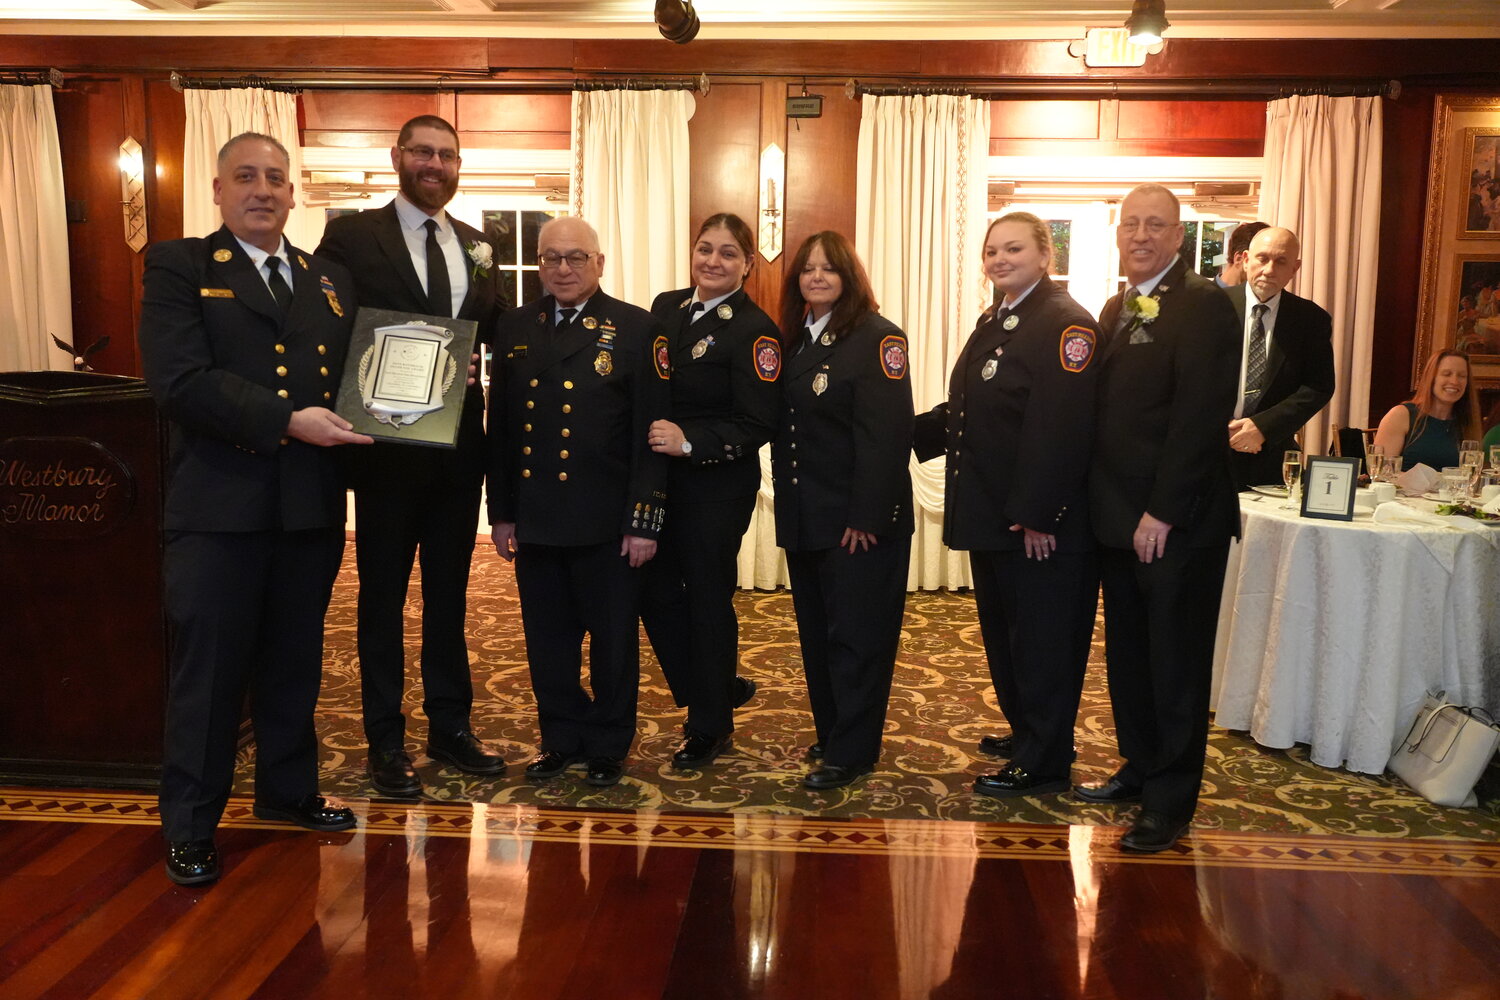 The East Meadow Fire District was awarded the Dave Rothbaum Silver Fox Award at the Feb. 2 installation dinner.